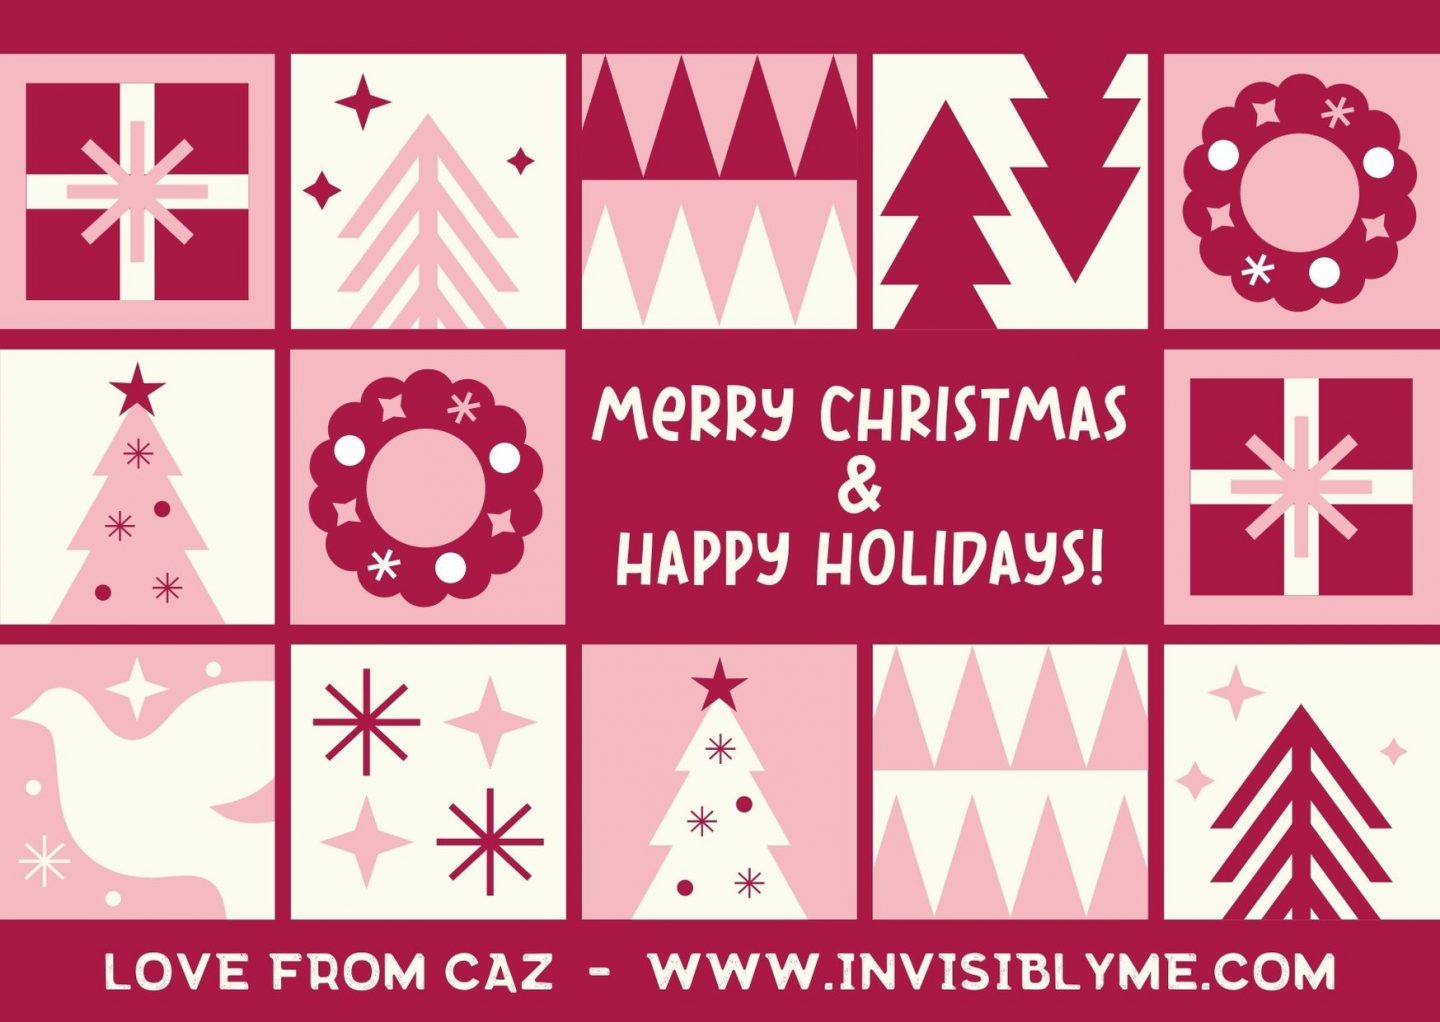 A digital Christmas Greetings Card made on Canva using free fonts from FontBundles. There are numerous square boxes with different digital icons in, like snowflakes, wreaths, presents and Christmas trees, all in deep pink, light pink and beige colours. In a box in the middle it reads: Wishing you a Merry Christmas & Happy Holidays. At the bottom is "love from Caz / Invisibly Me."